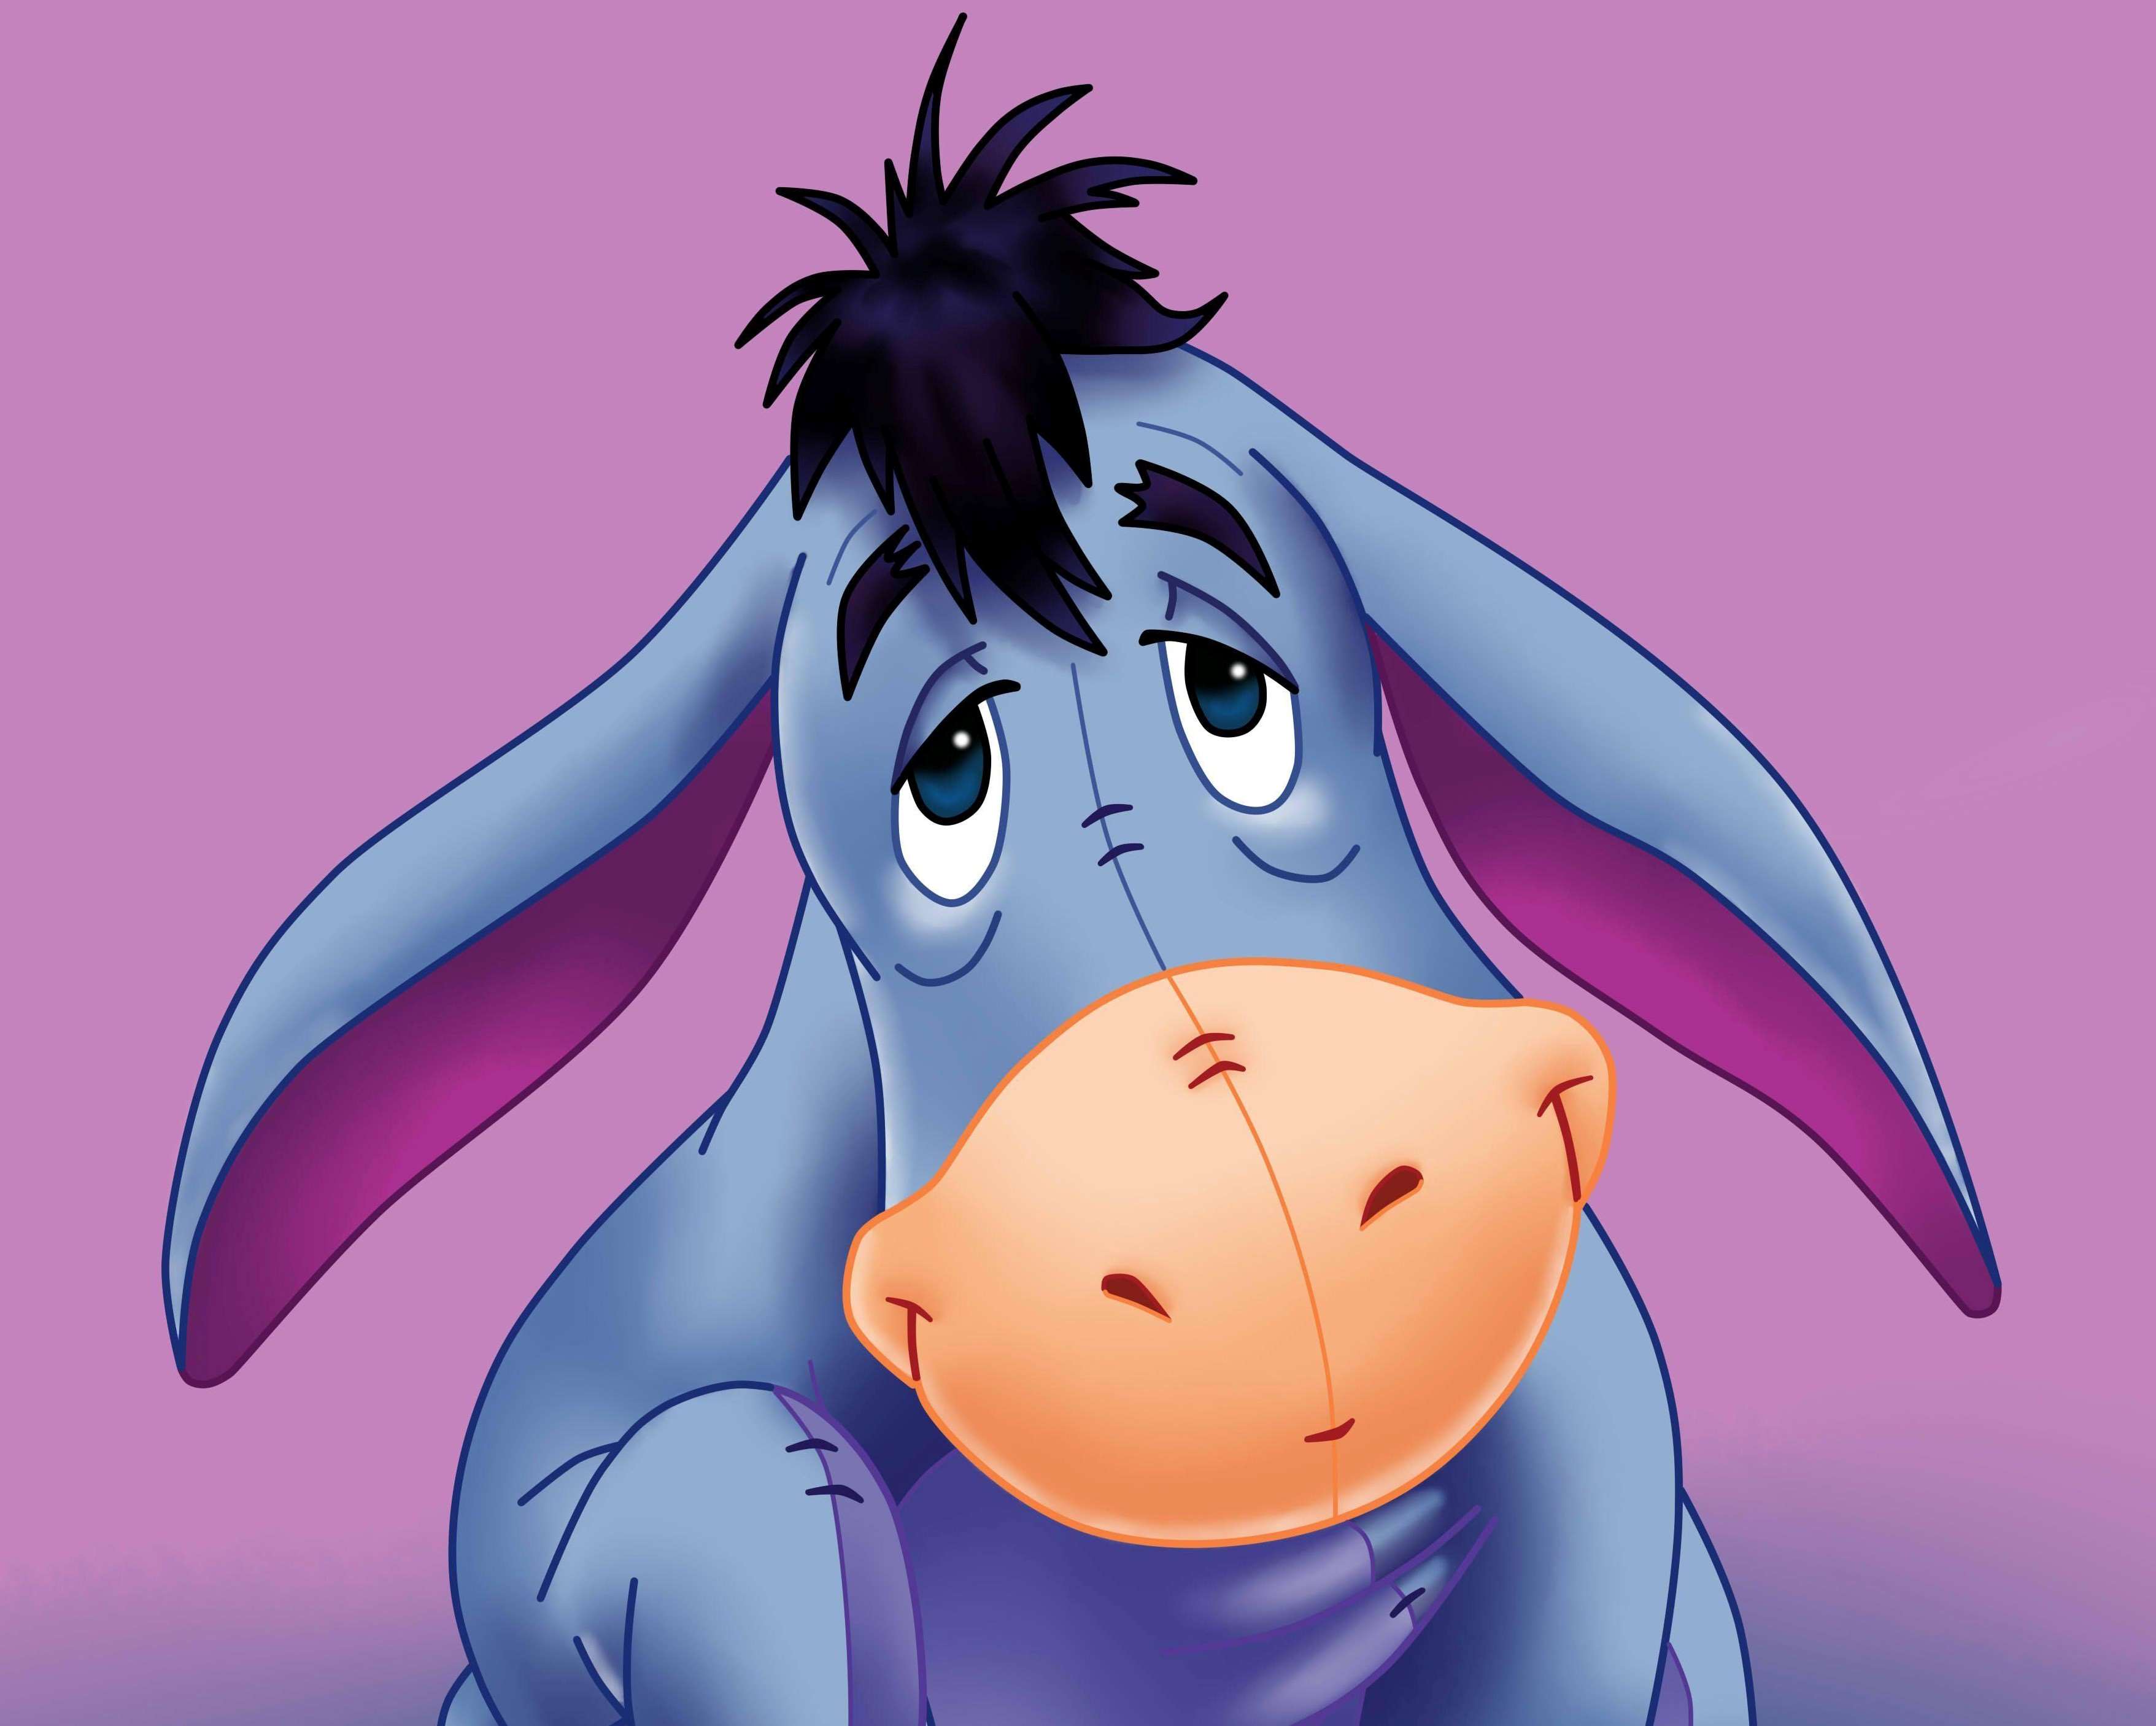 https://facts.net/wp-content/uploads/2023/08/19-facts-about-eeyore-winnie-the-pooh-1693475477.jpg